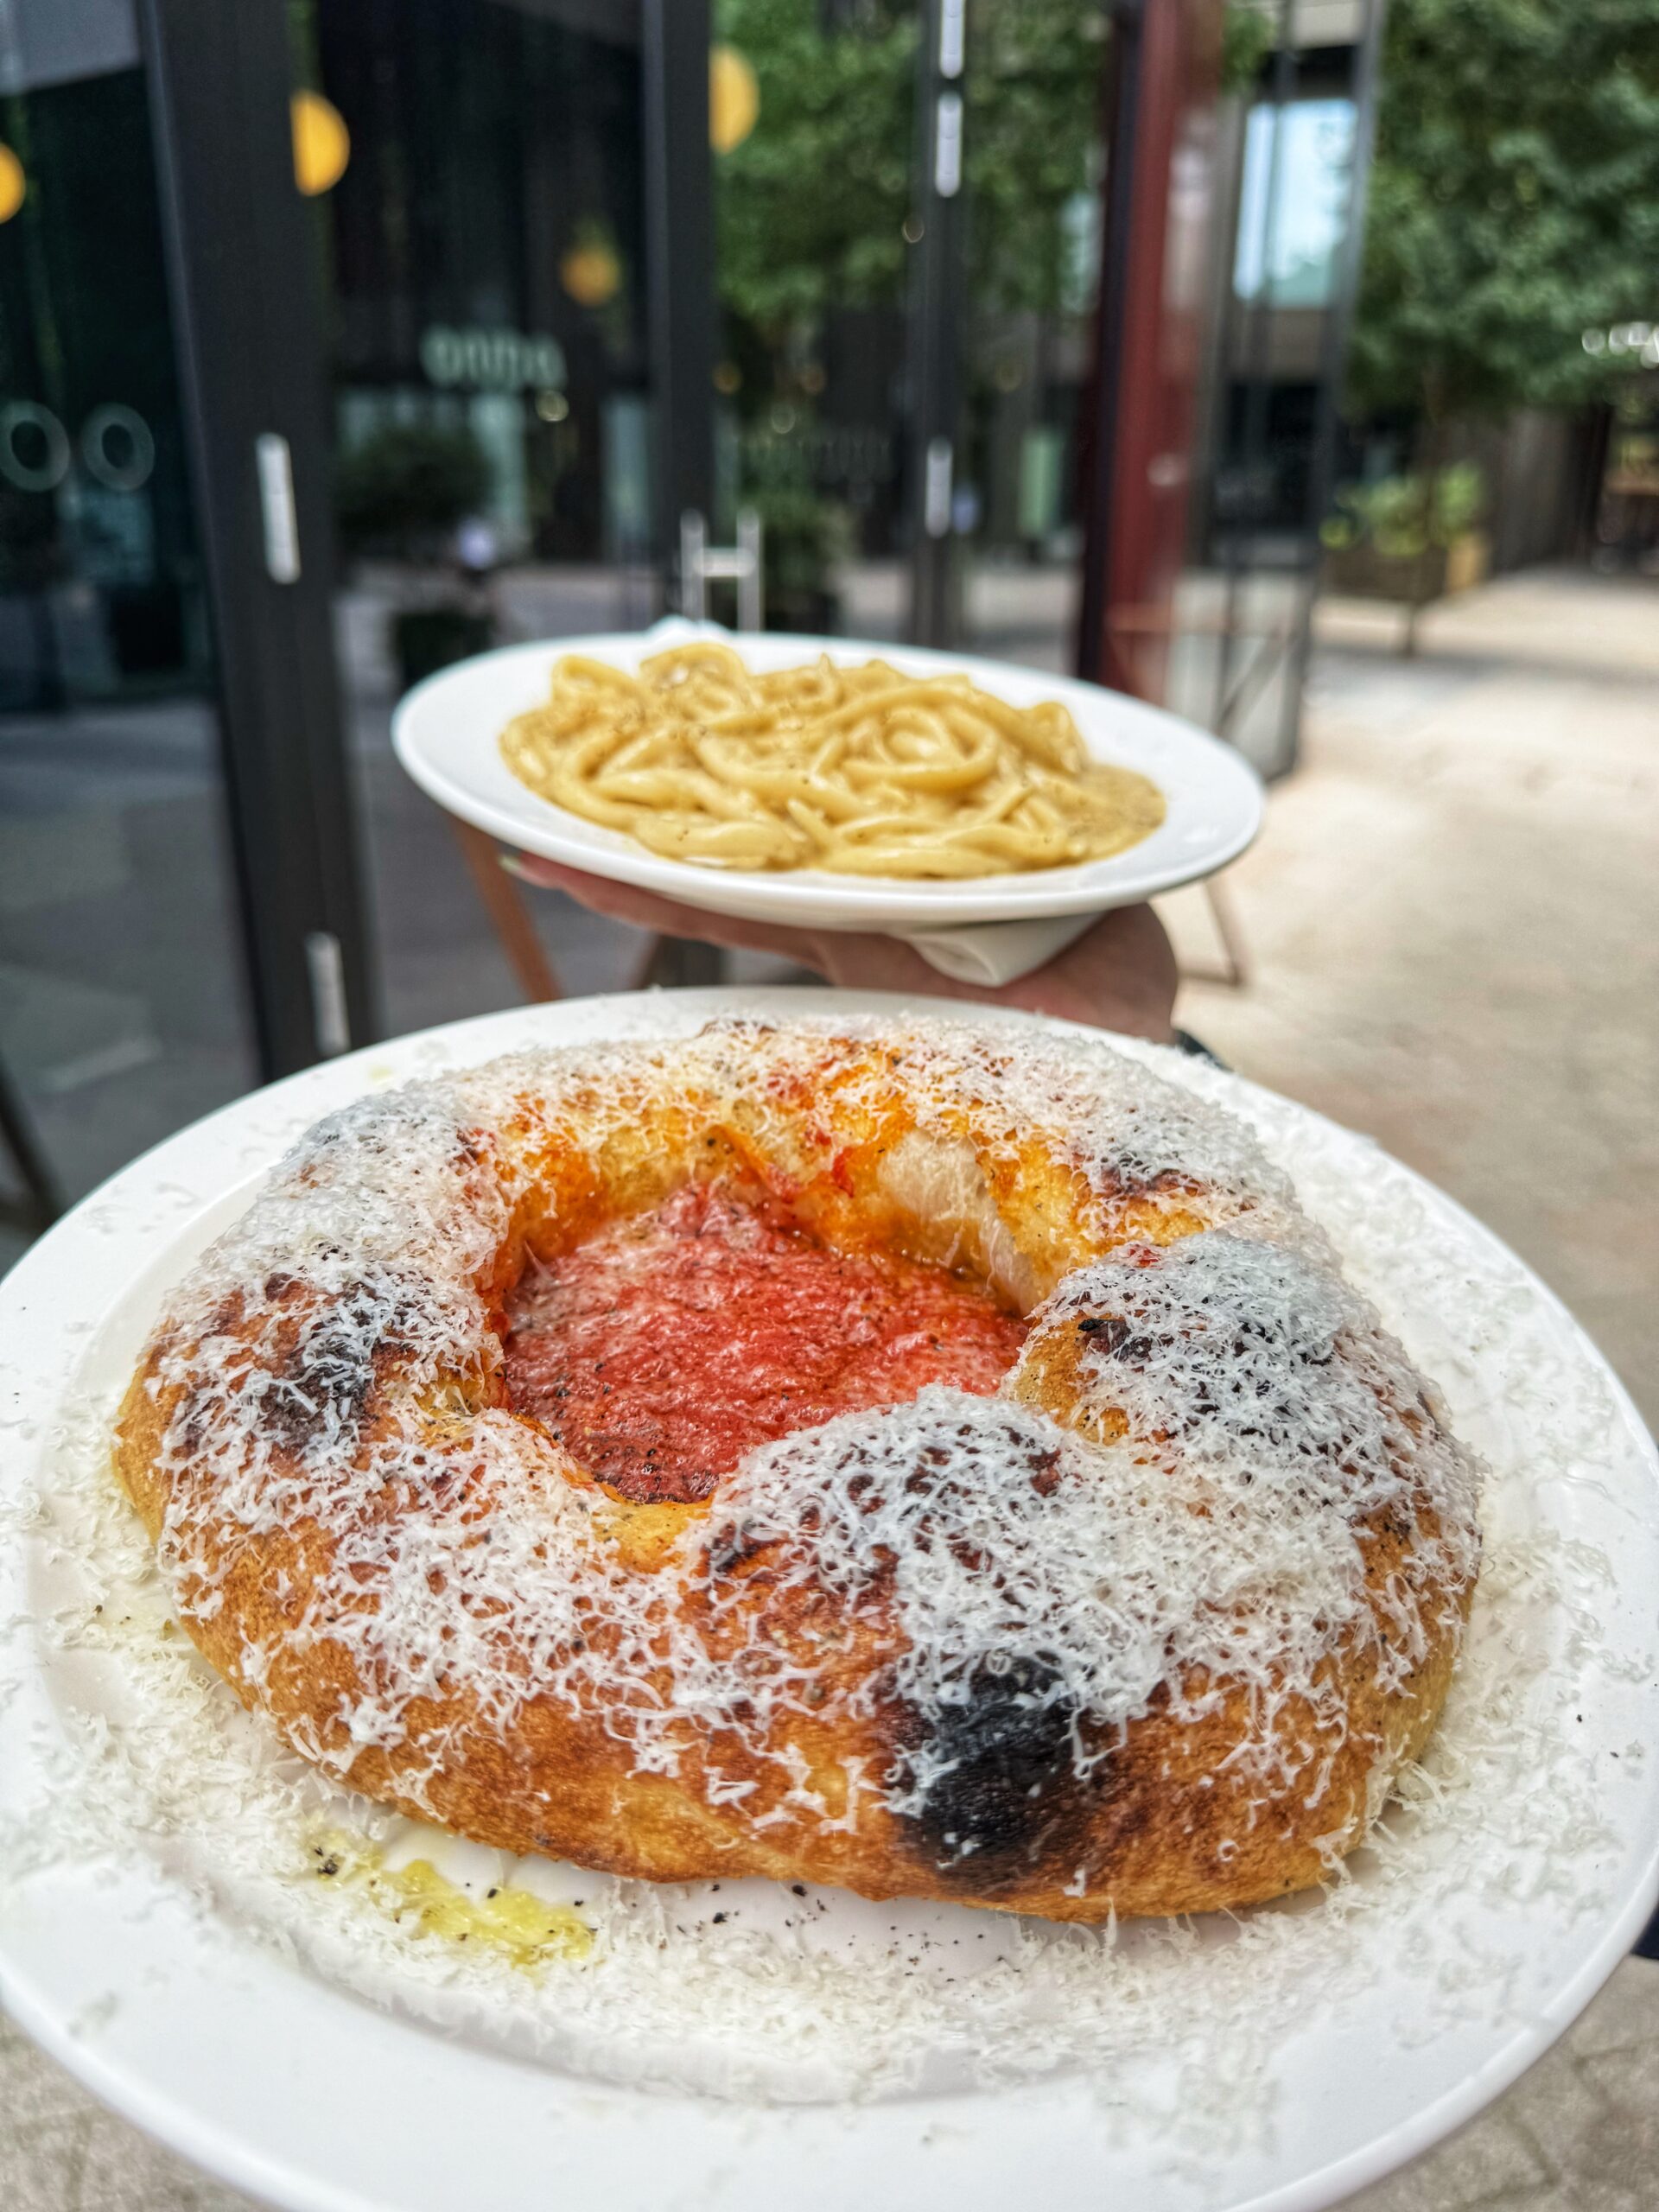 Pasta and pizzetta dishes at Onda in Manchester